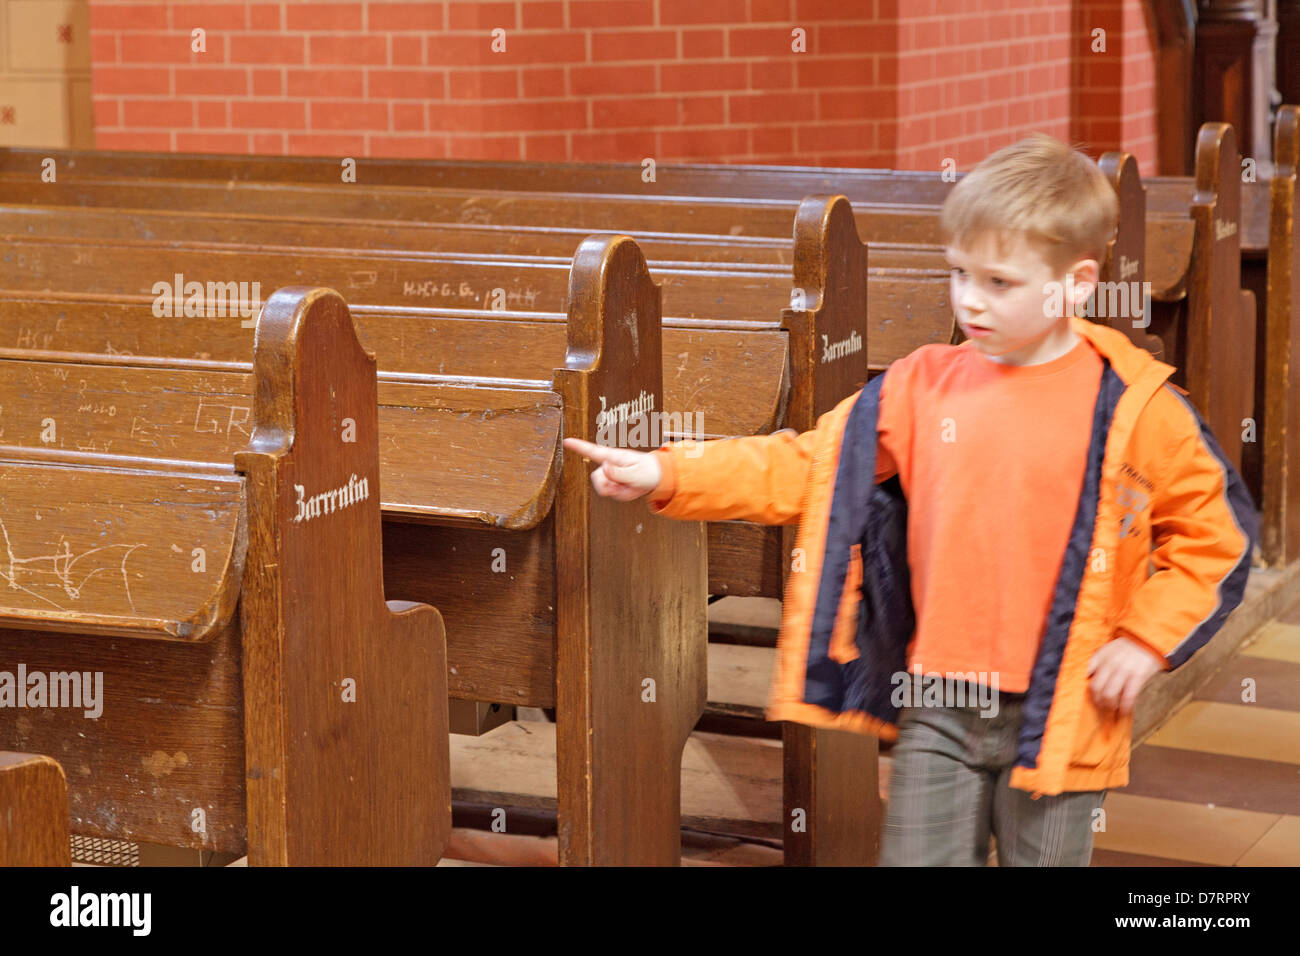 young boy counting the benches inside the church, Zarrentin, Mecklenburg-West Pomerania, Germany Stock Photo